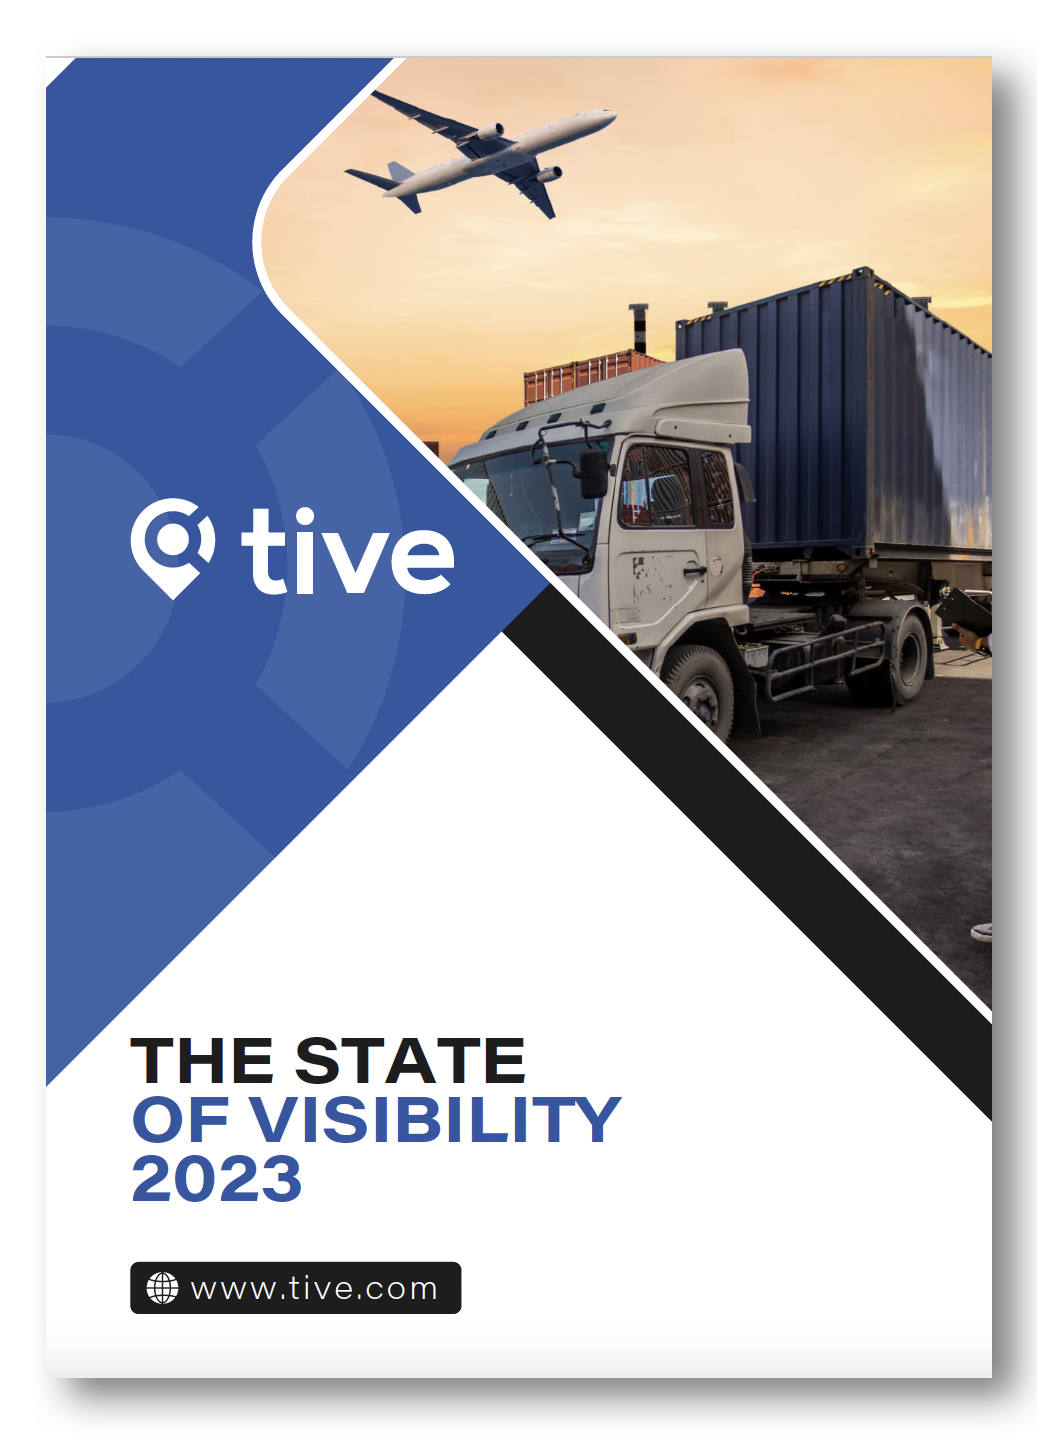 Supply Chain Visibility: 2023 Market Survey Report | Tive